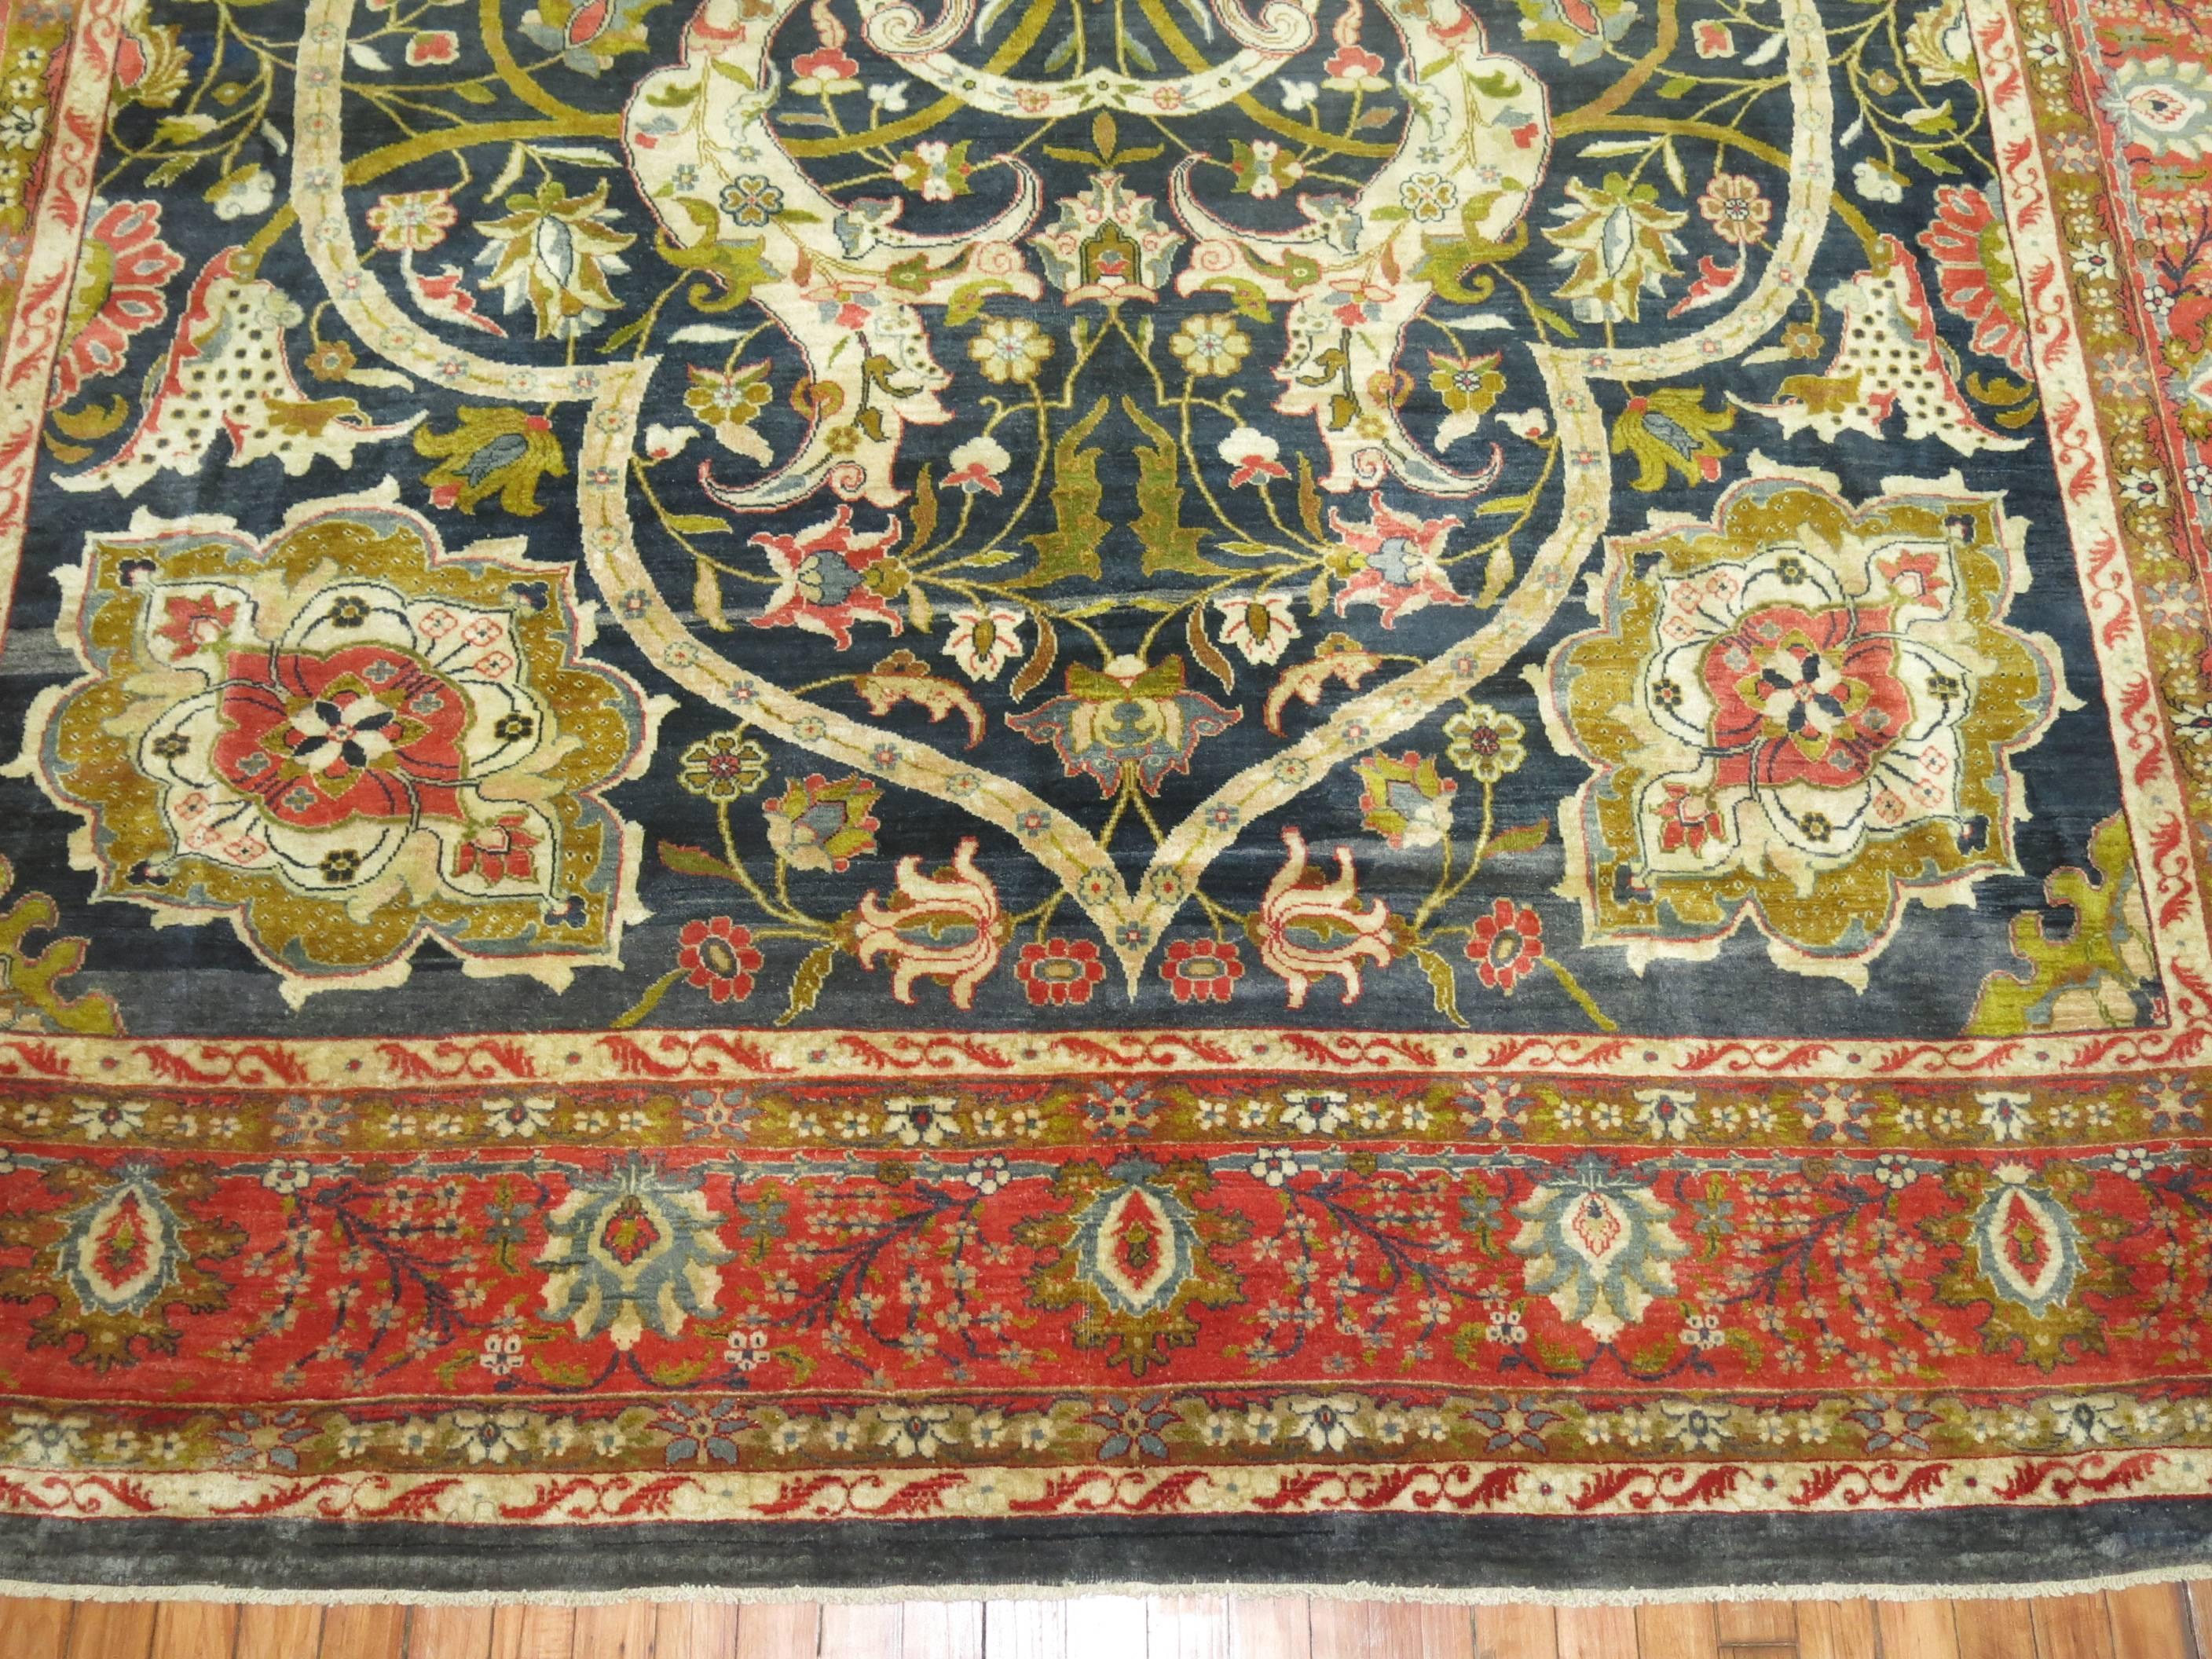 Antique Indian rugs convey impressive ideas of sophistication and cultivation. Their use of mesmerizing motifs have transcended time and location making some of the most sought after rugs available. From large scale rugs that draw the attention of